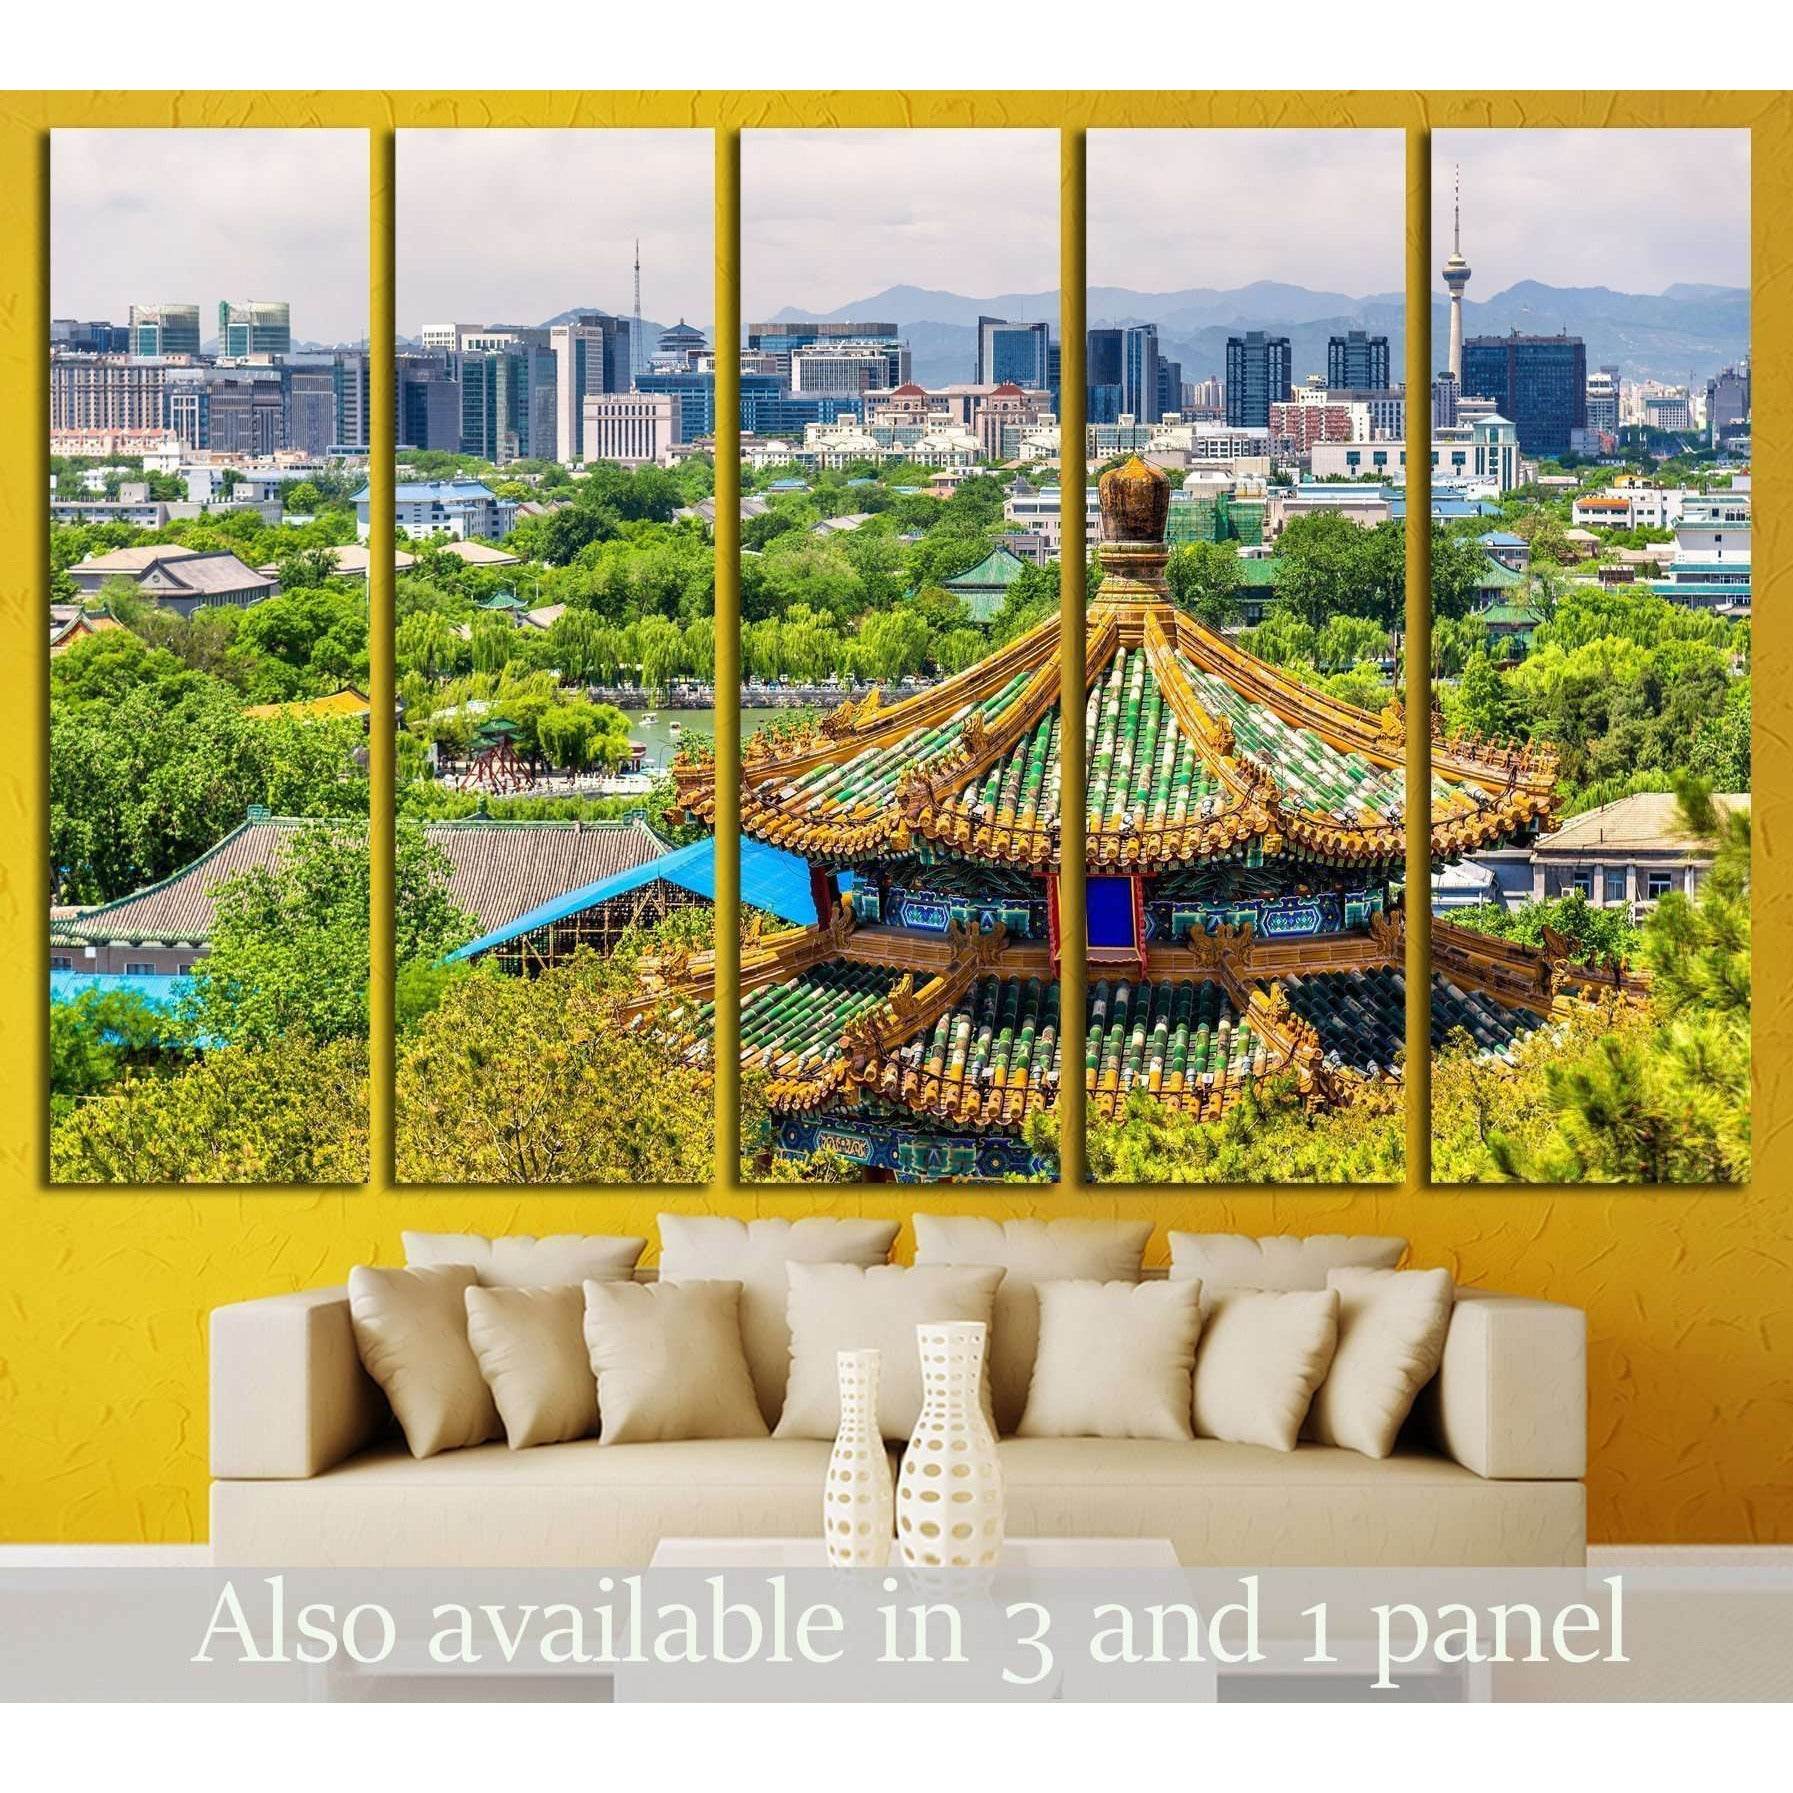 City view of Beijing from Jingshan park, China №1370 Ready to Hang Canvas Print